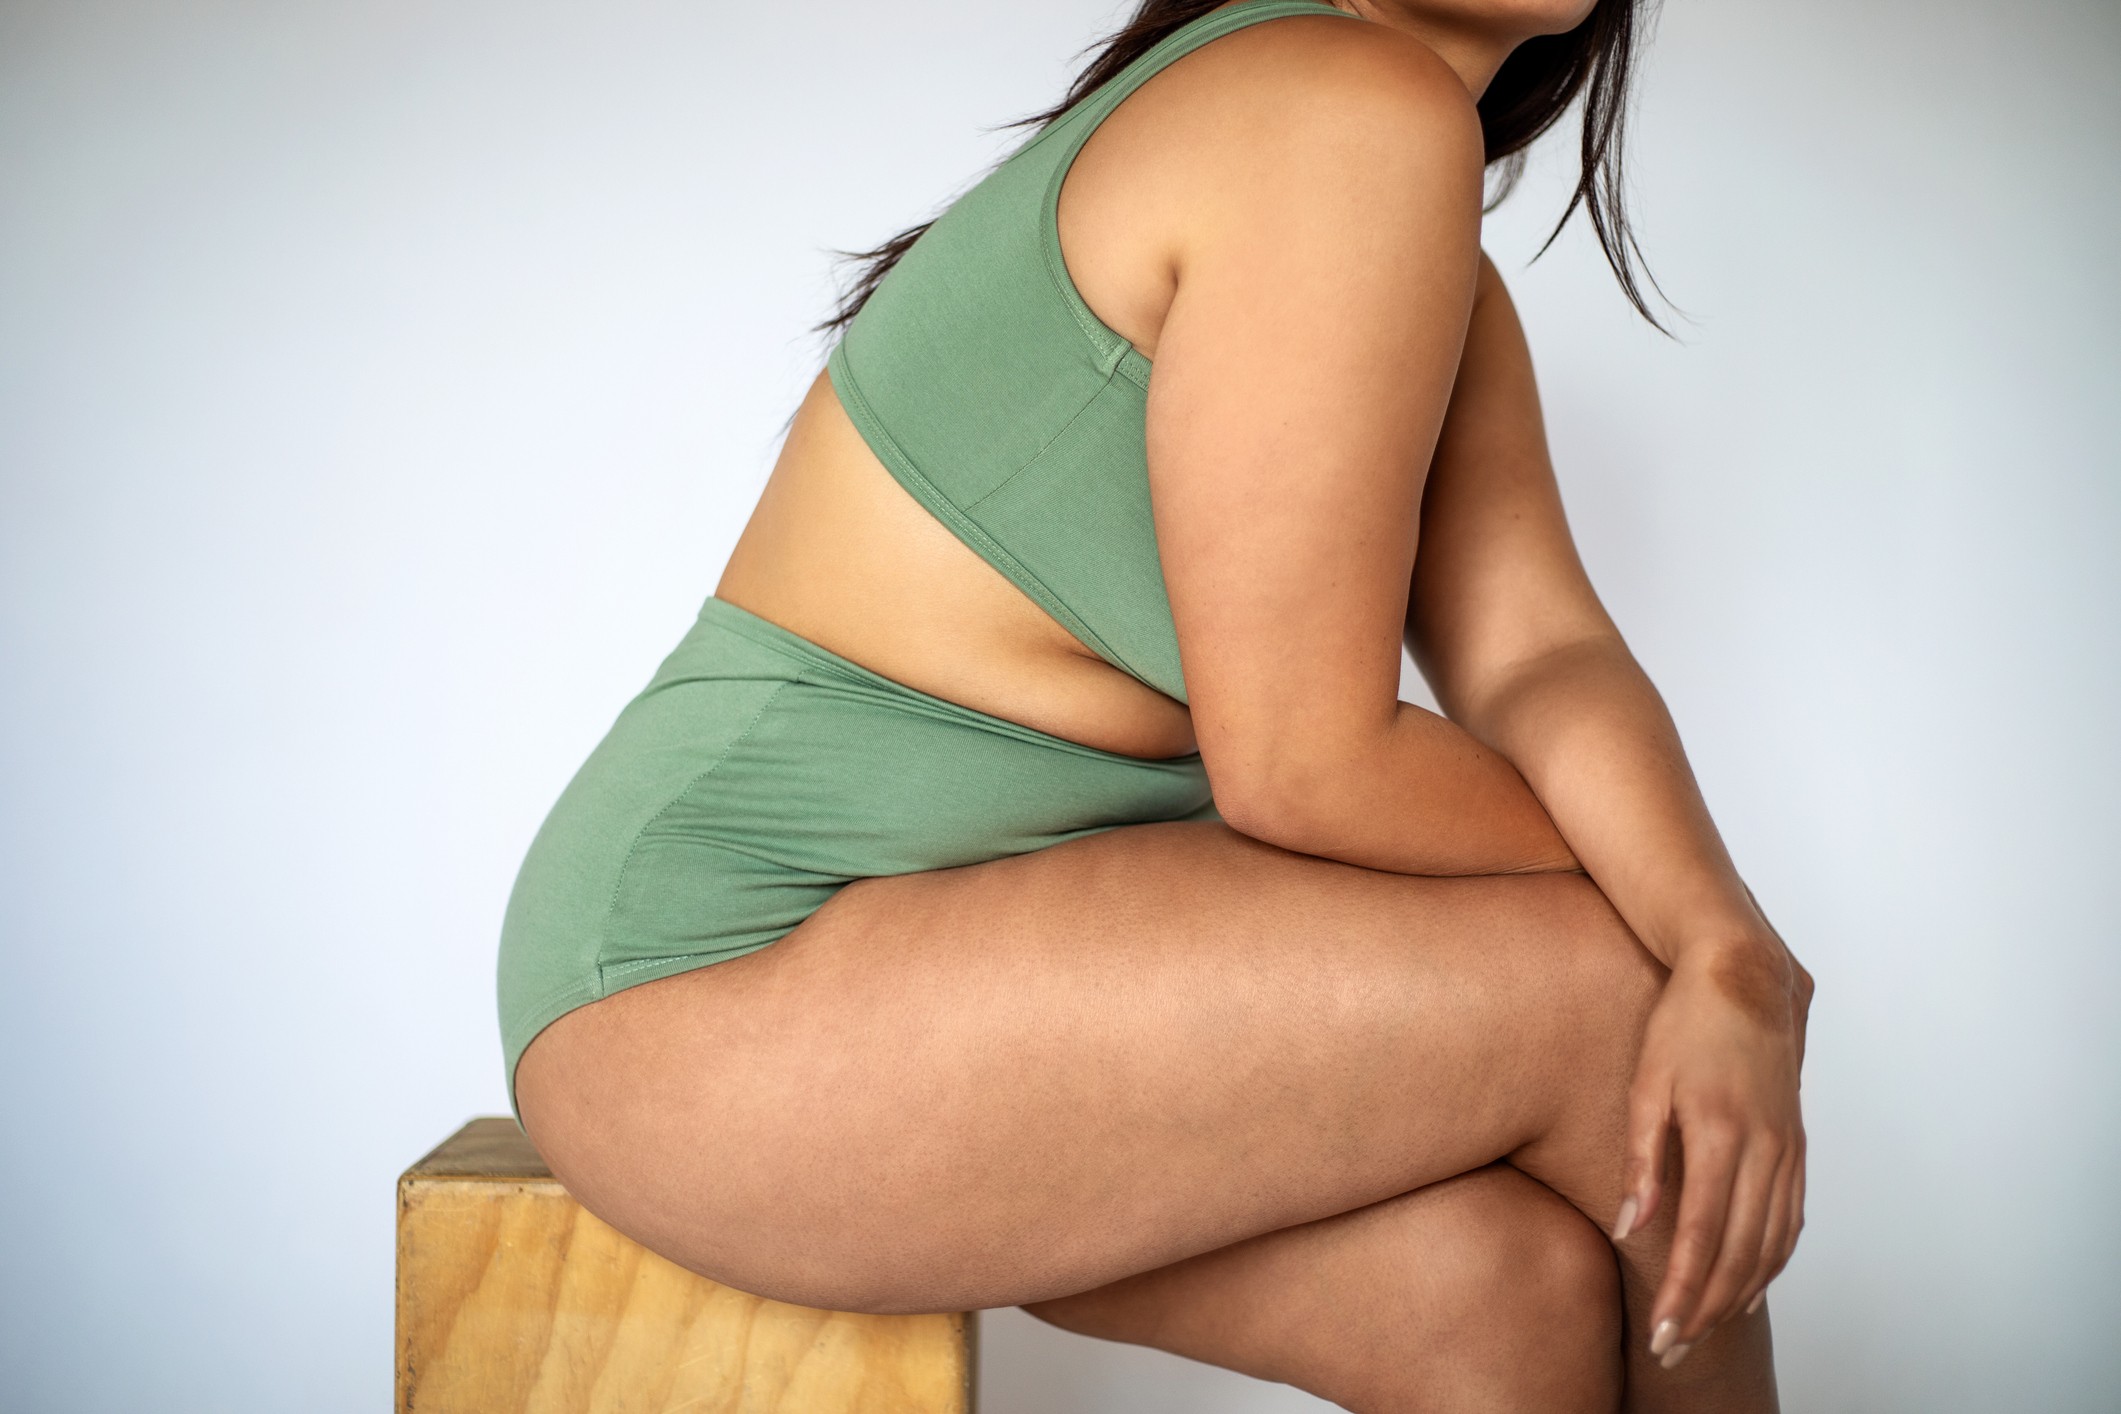 Plus size woman with fat legs sitting on stool. Oversized woman wearing lingerie with cellulite on thighs over white background. (Foto: Getty Images)